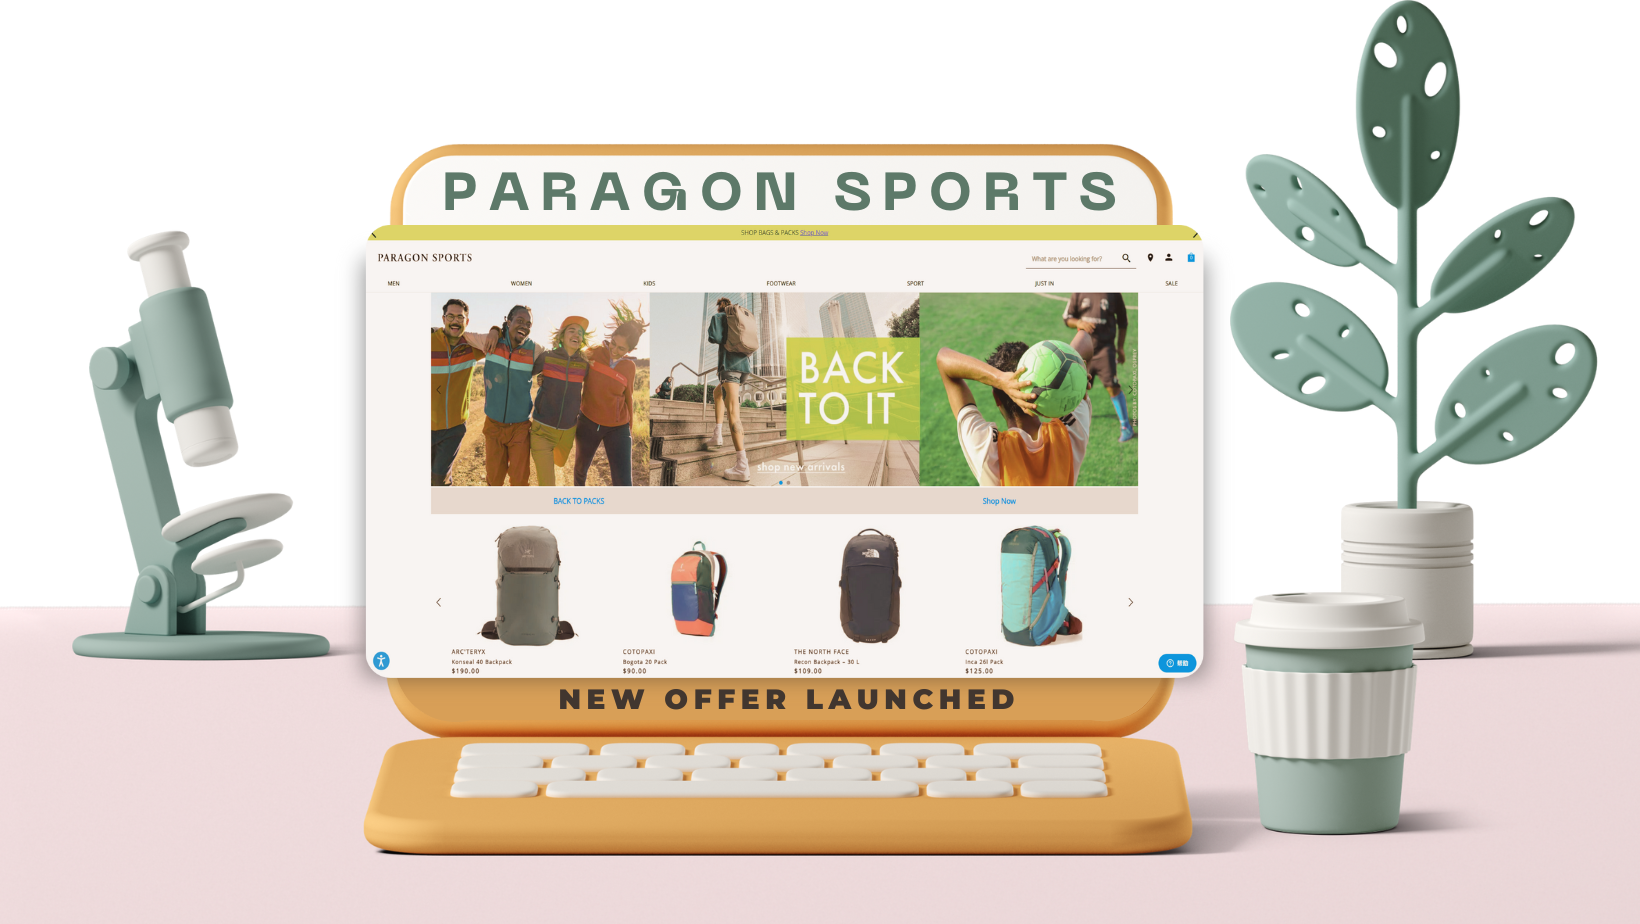 New offer launched: Paragon Sports Affiliate Program